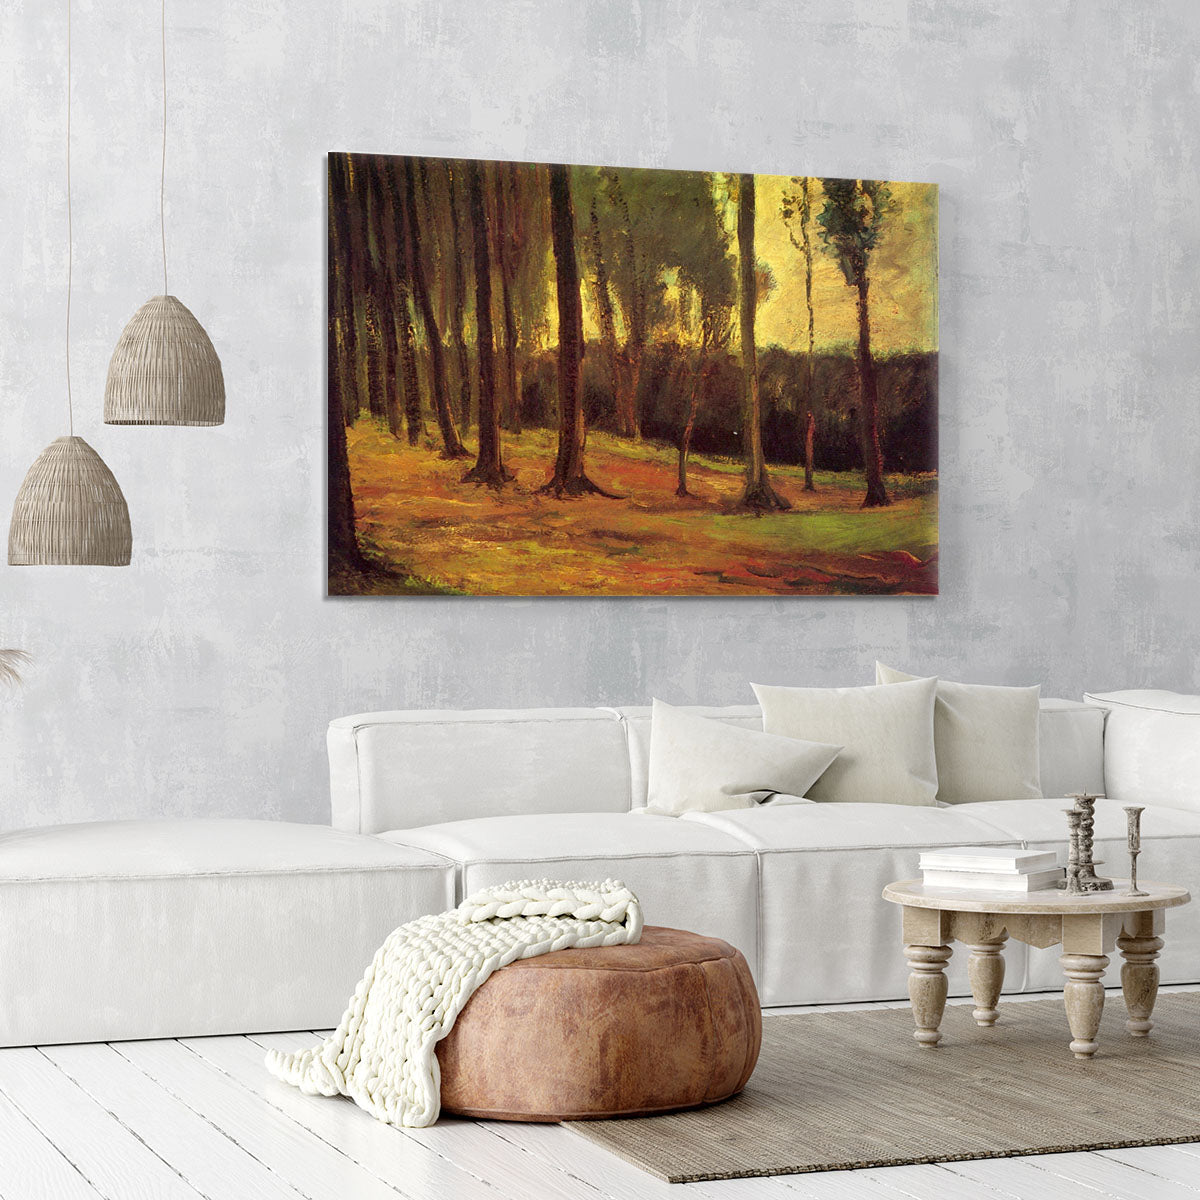 Edge of a Wood by Van Gogh Canvas Print or Poster - Canvas Art Rocks - 6